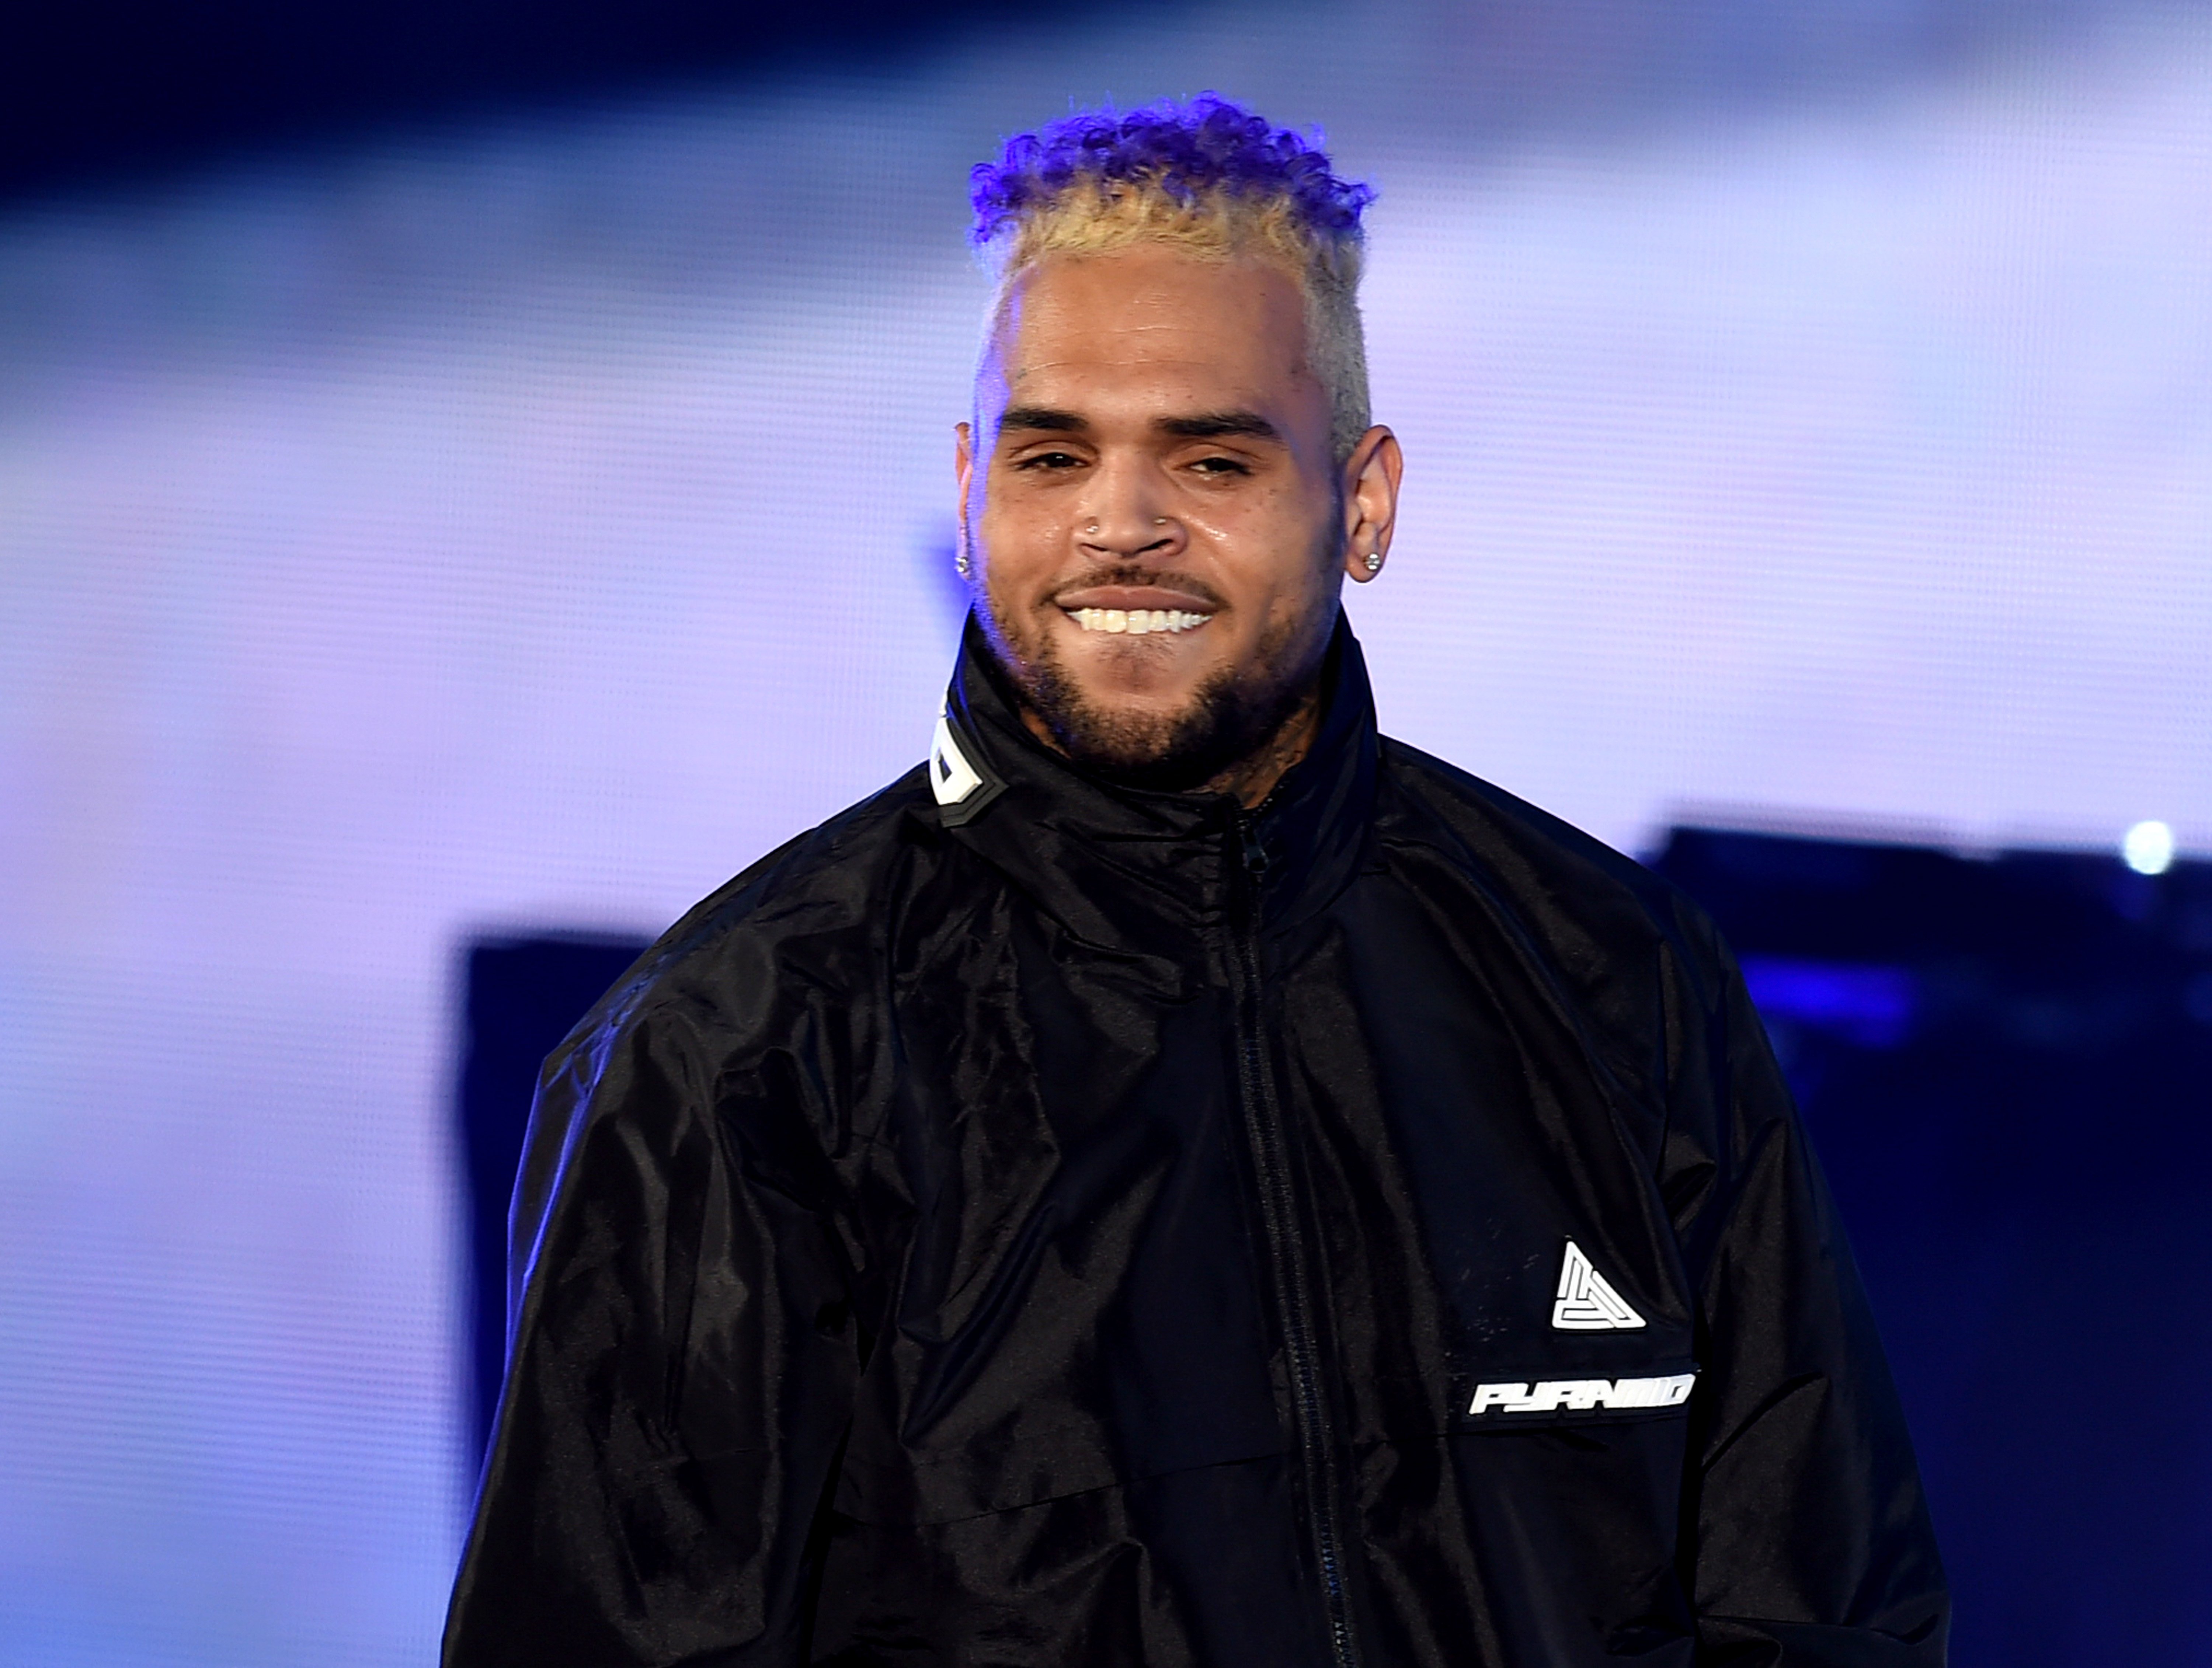  Chris Brown performs onstage during "We Can Survive, A Radio.com Event" on October 20, 201,8 in Los Angeles, California. | Source: Getty Images.